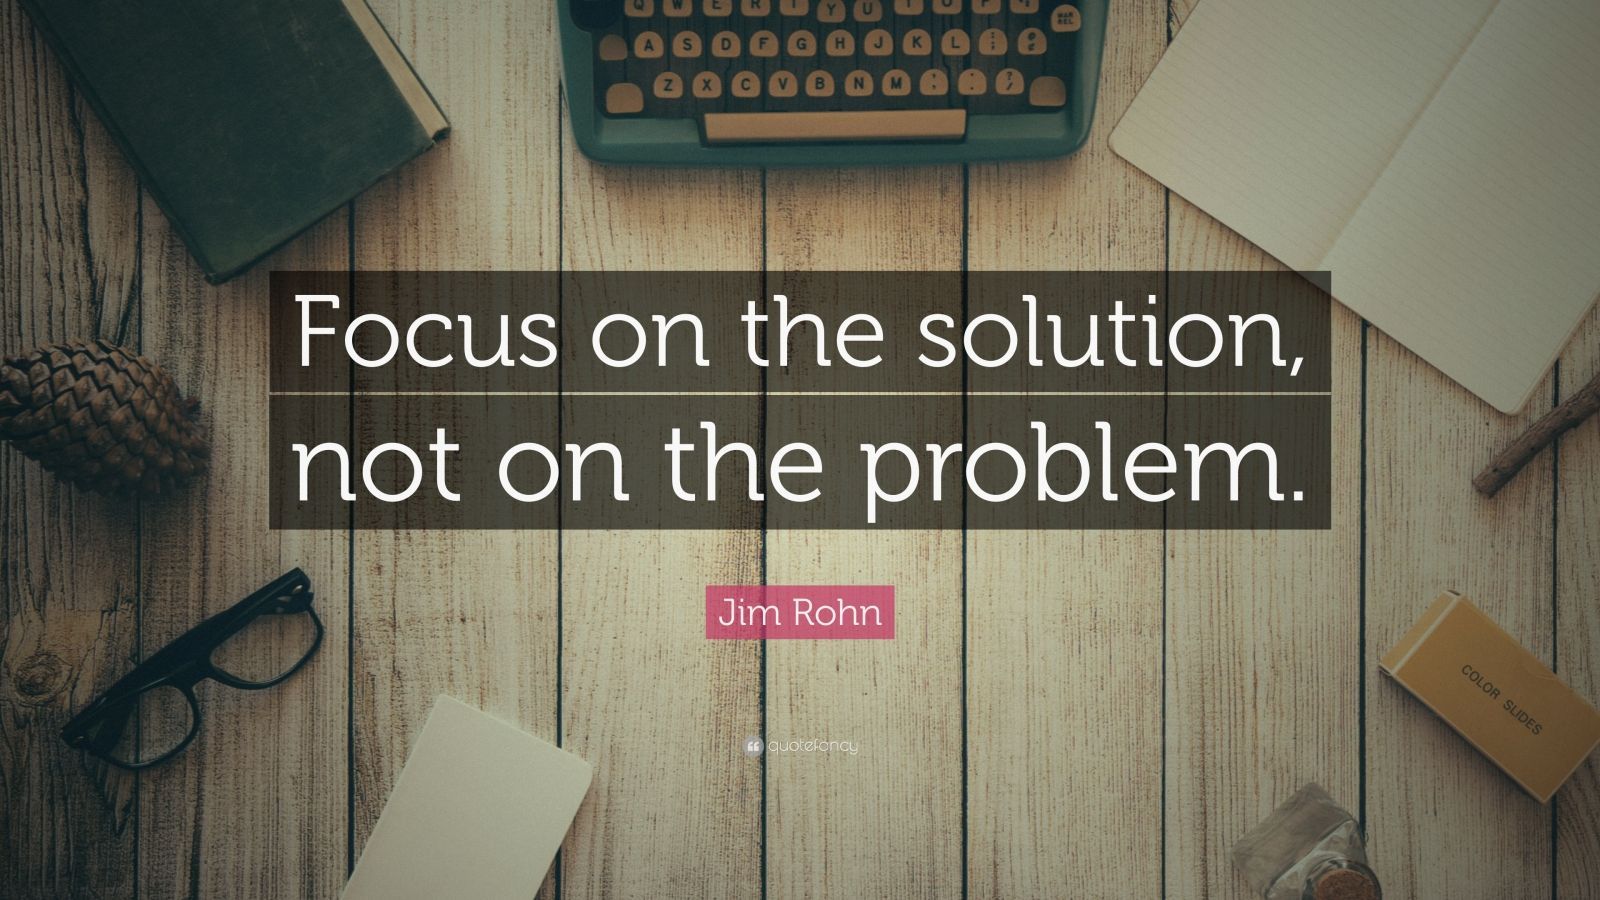 Jim Rohn Quote: “Focus on the solution, not on the problem.” (12 wallpaper)